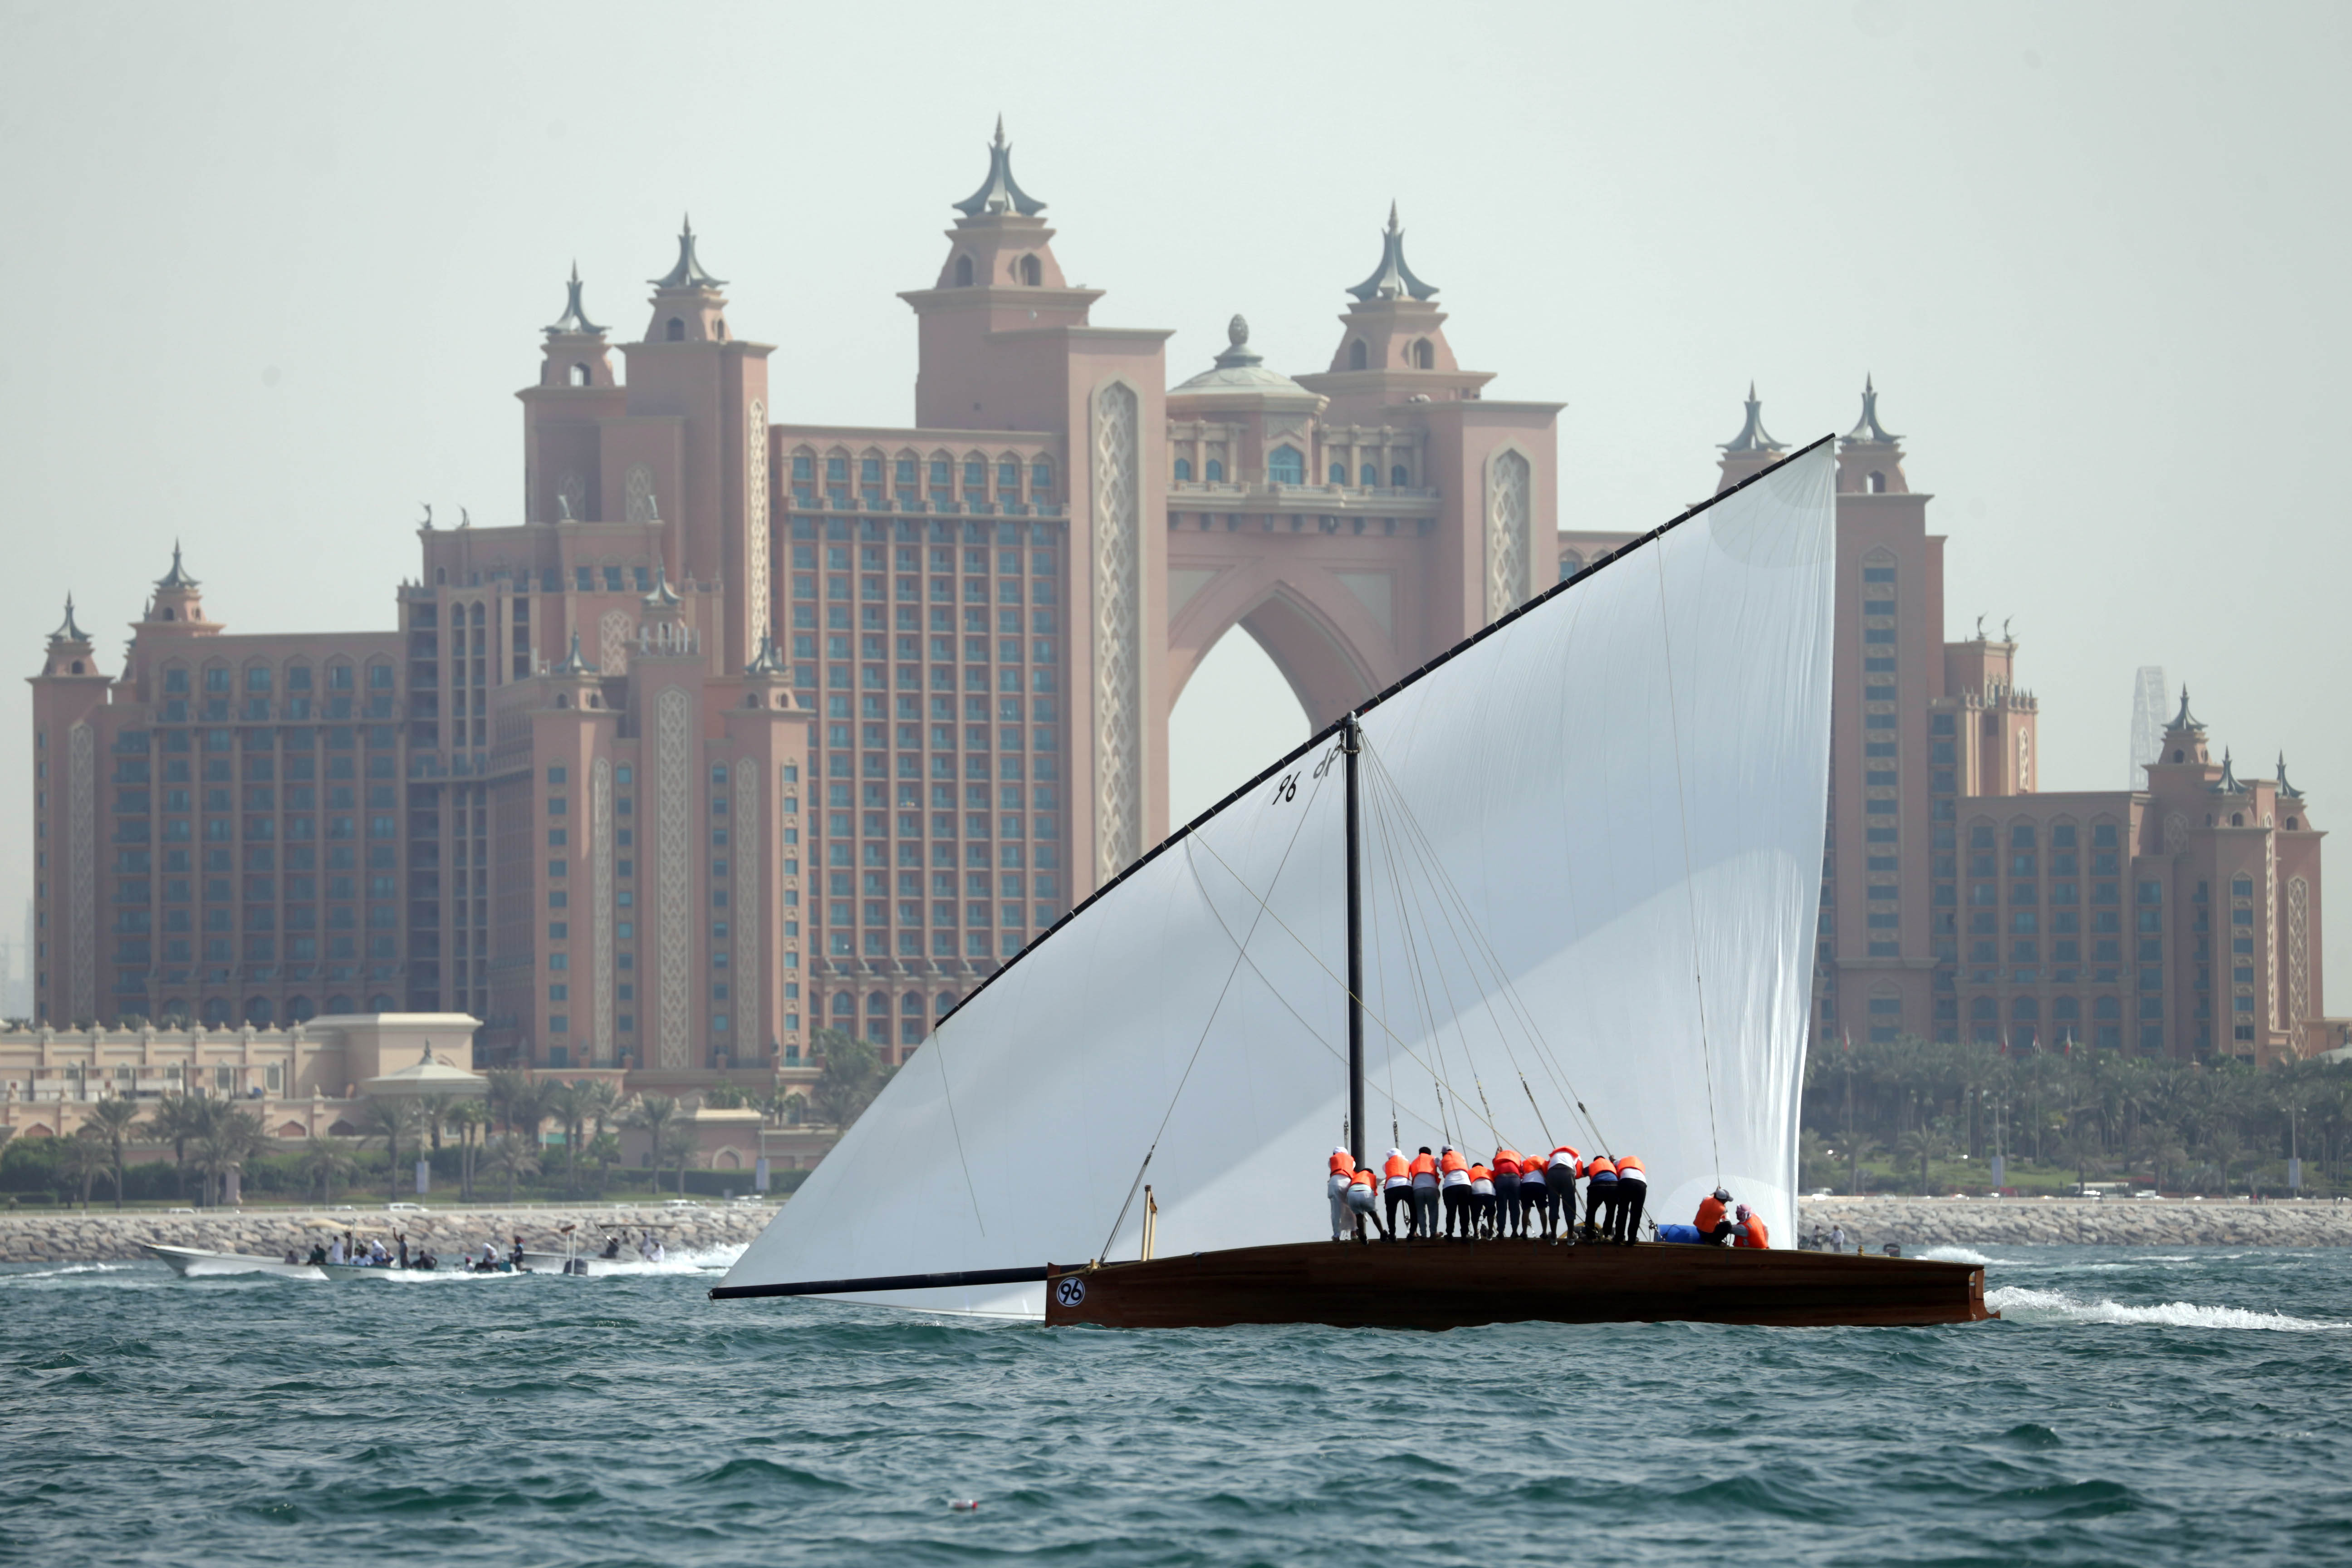 Registration for Dhow Sailing Race 43ft Closes Today (Friday)